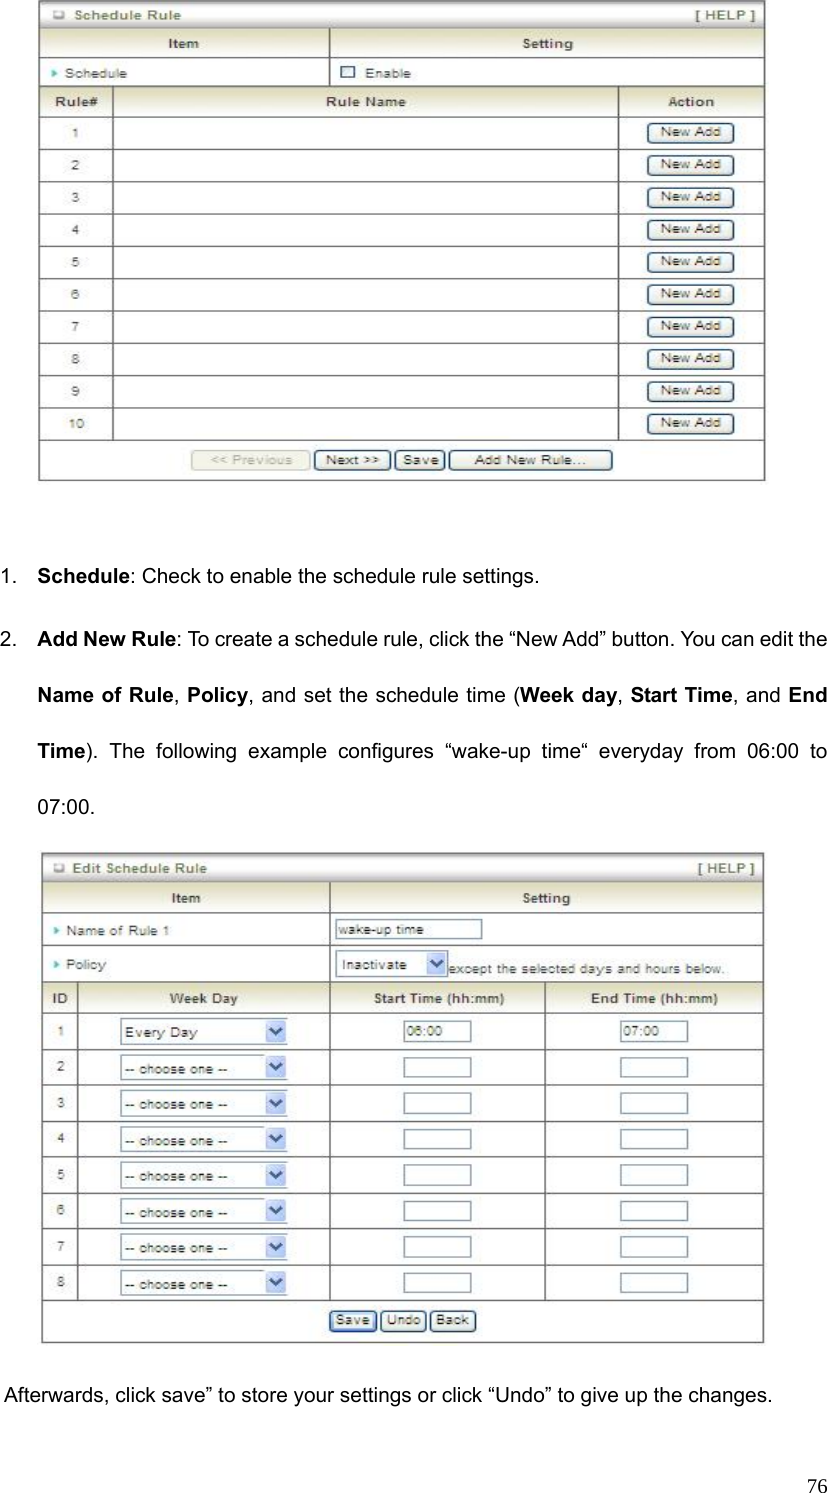  76  1.  Schedule: Check to enable the schedule rule settings.   2.  Add New Rule: To create a schedule rule, click the “New Add” button. You can edit the Name of Rule, Policy, and set the schedule time (Week day, Start Time, and End Time). The following example configures “wake-up time“ everyday from 06:00 to 07:00.          Afterwards, click save” to store your settings or click “Undo” to give up the changes. 